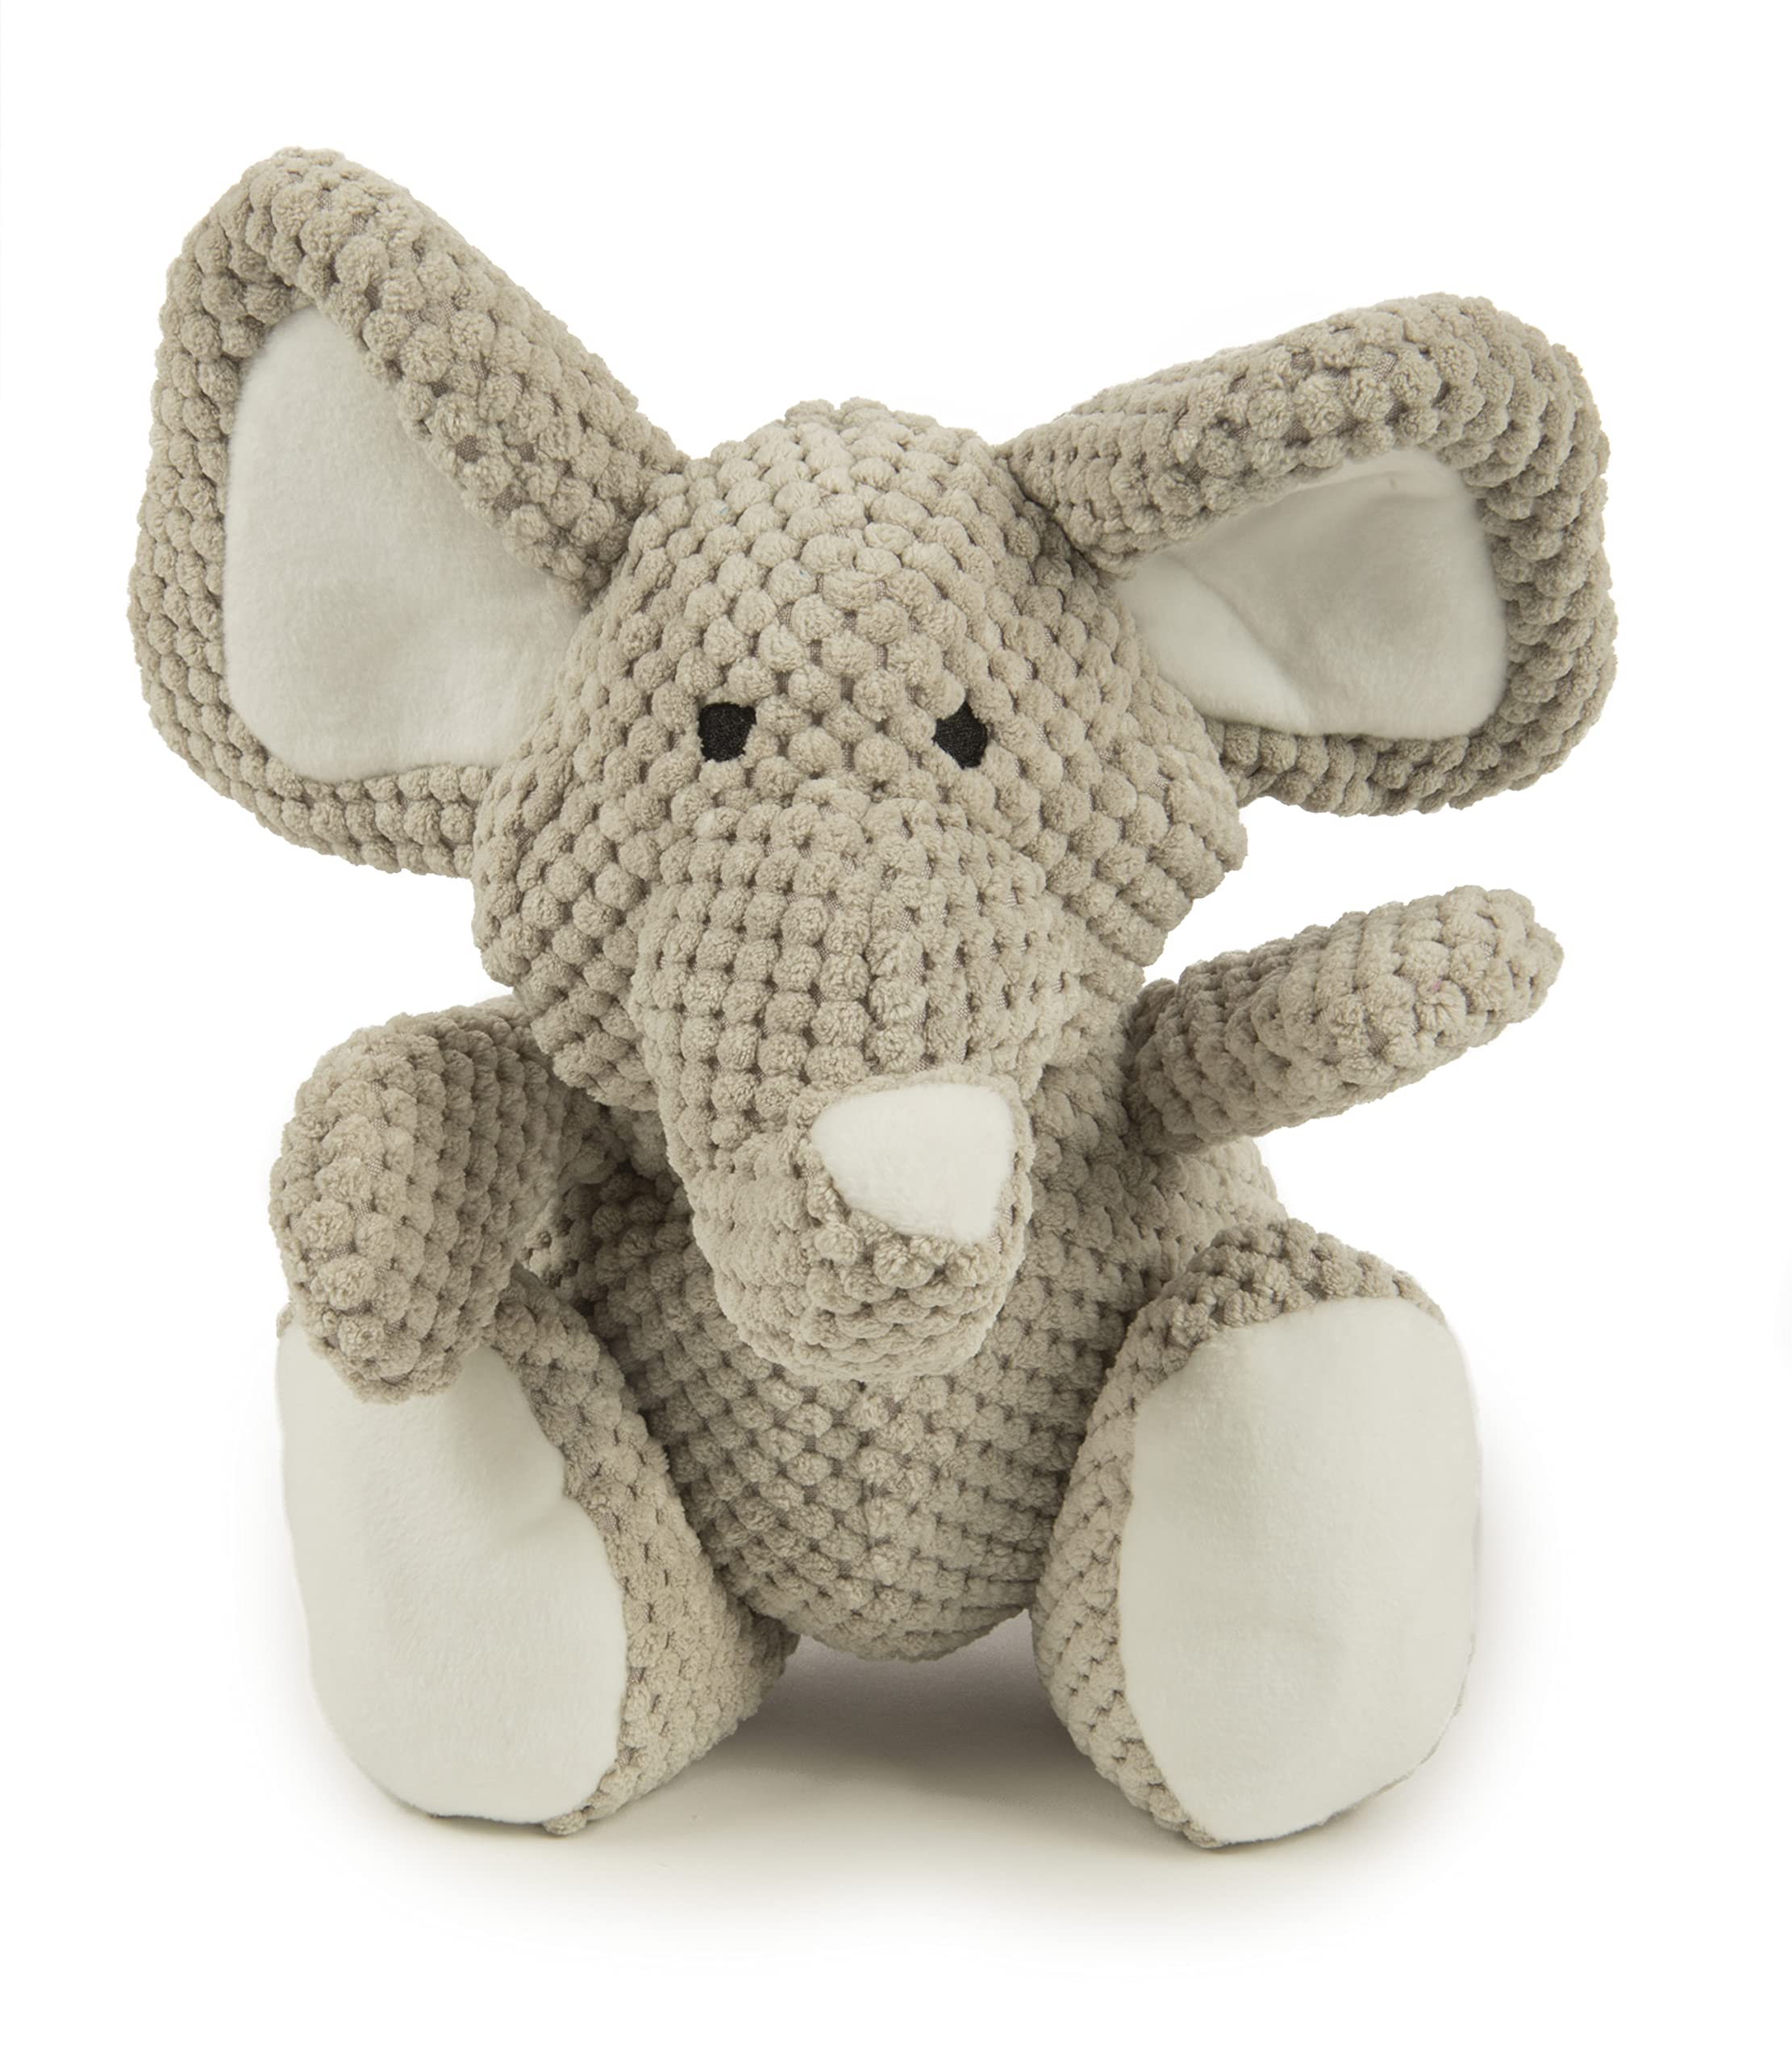 Book Cover goDog Checkers Elephant Squeaky Plush Dog Toy, Chew Guard Technology - Gray, Large Checkers Large Checkers - Elephant (Gray)